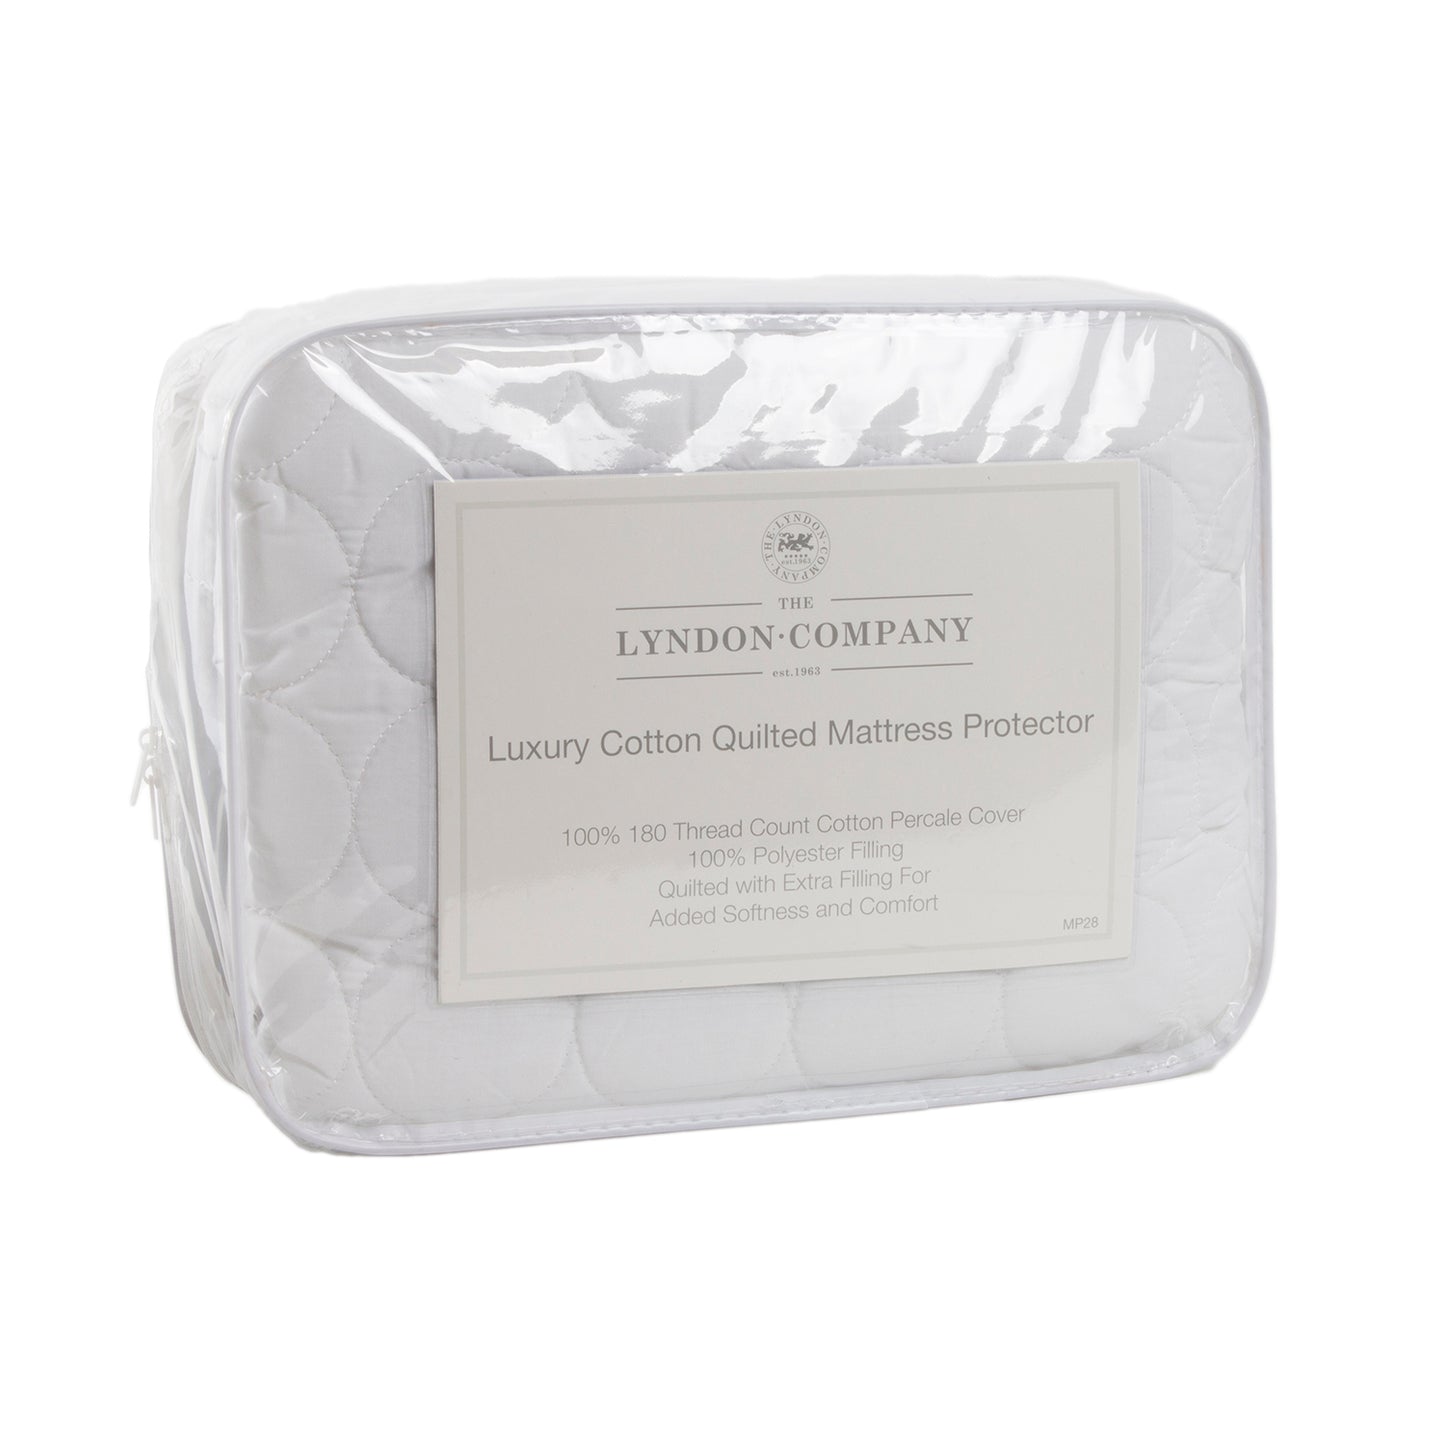 The Lyndon Company Luxury Cotton Quilted Mattress Protector